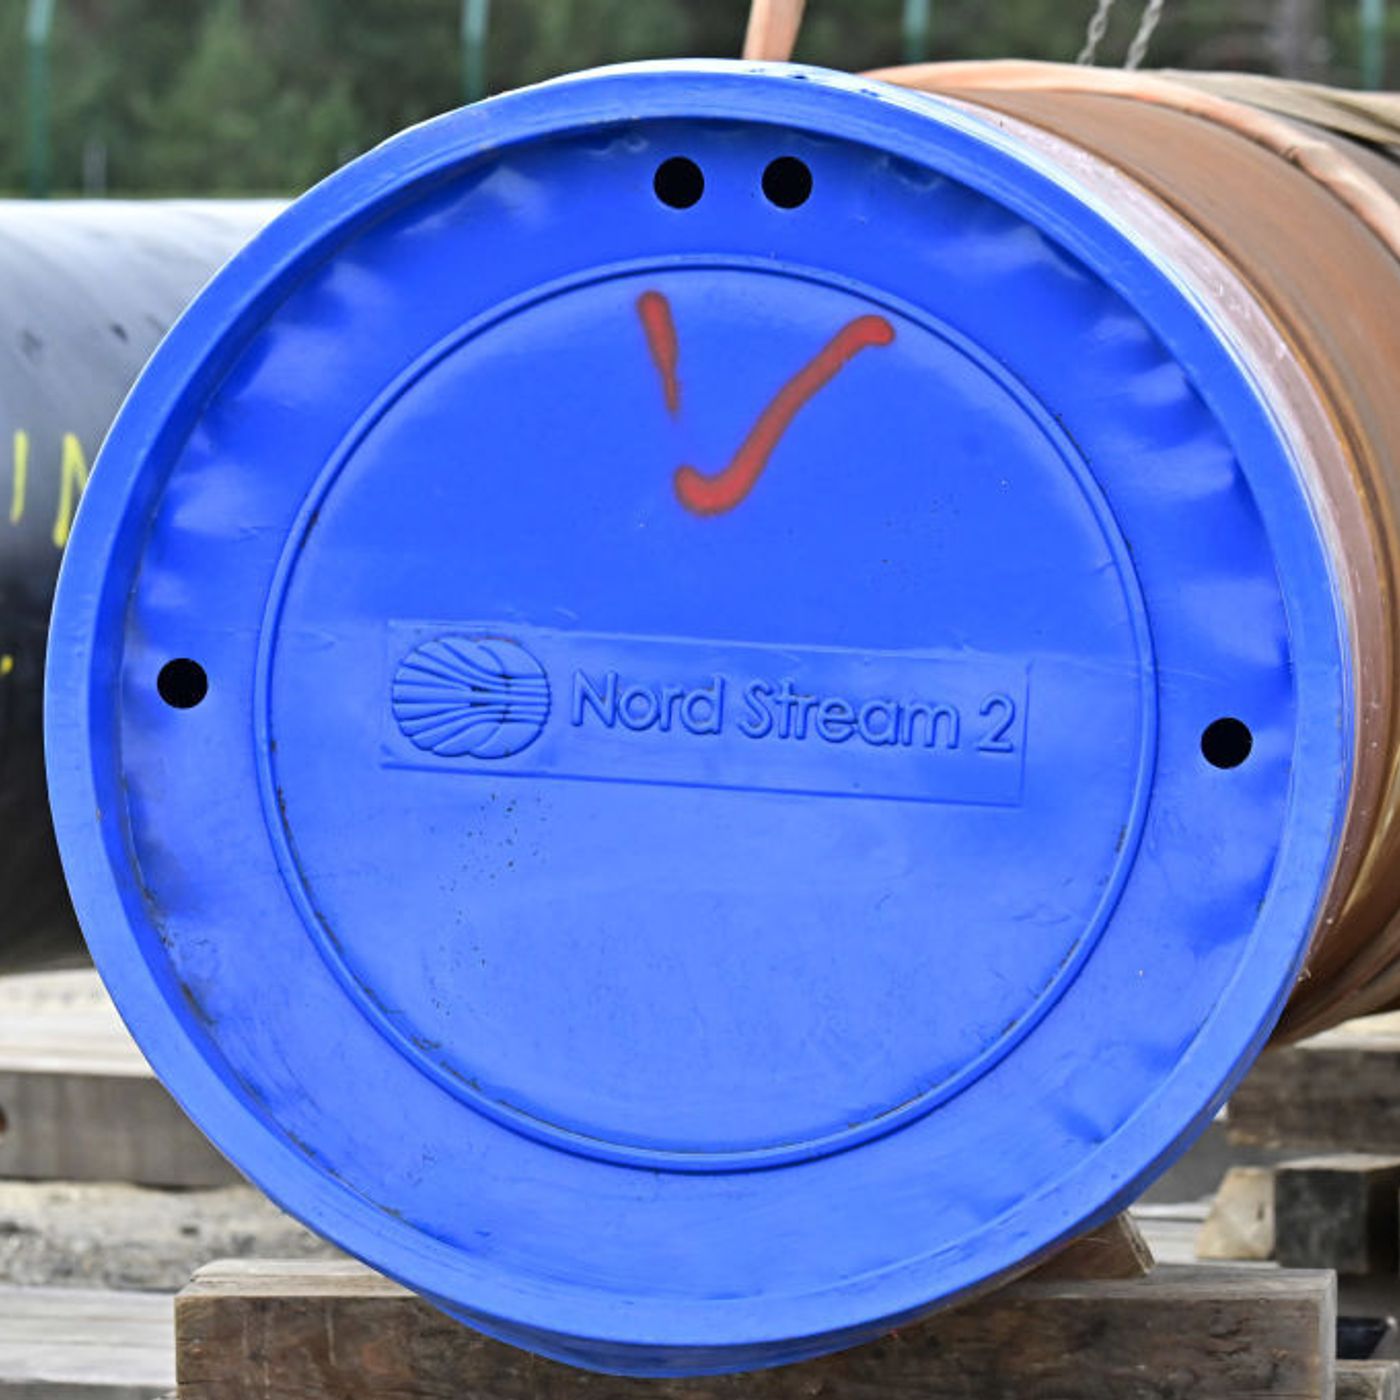 Is Seymour Hersh wrong about the Nord Stream pipelines?